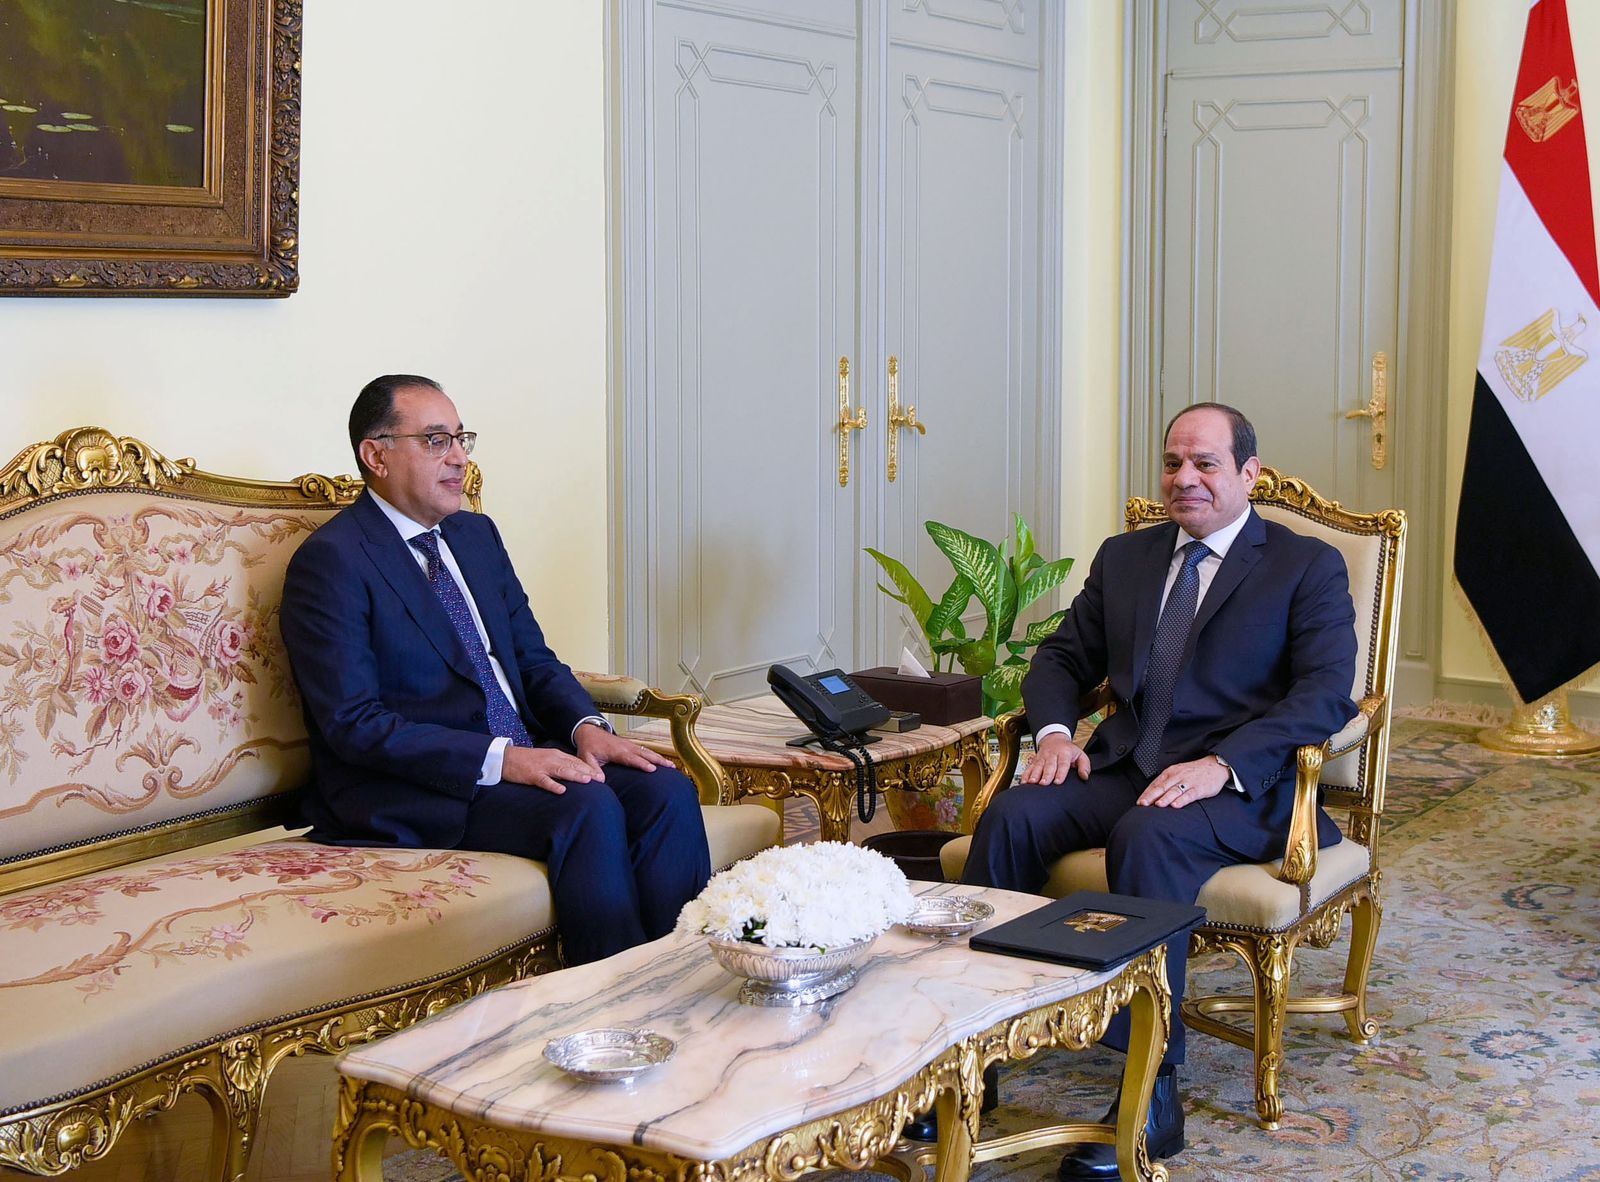 President Sisi: I commissioned Dr. Madbouly to form a new government that includes the expertise and competencies necessary to manage the next stage